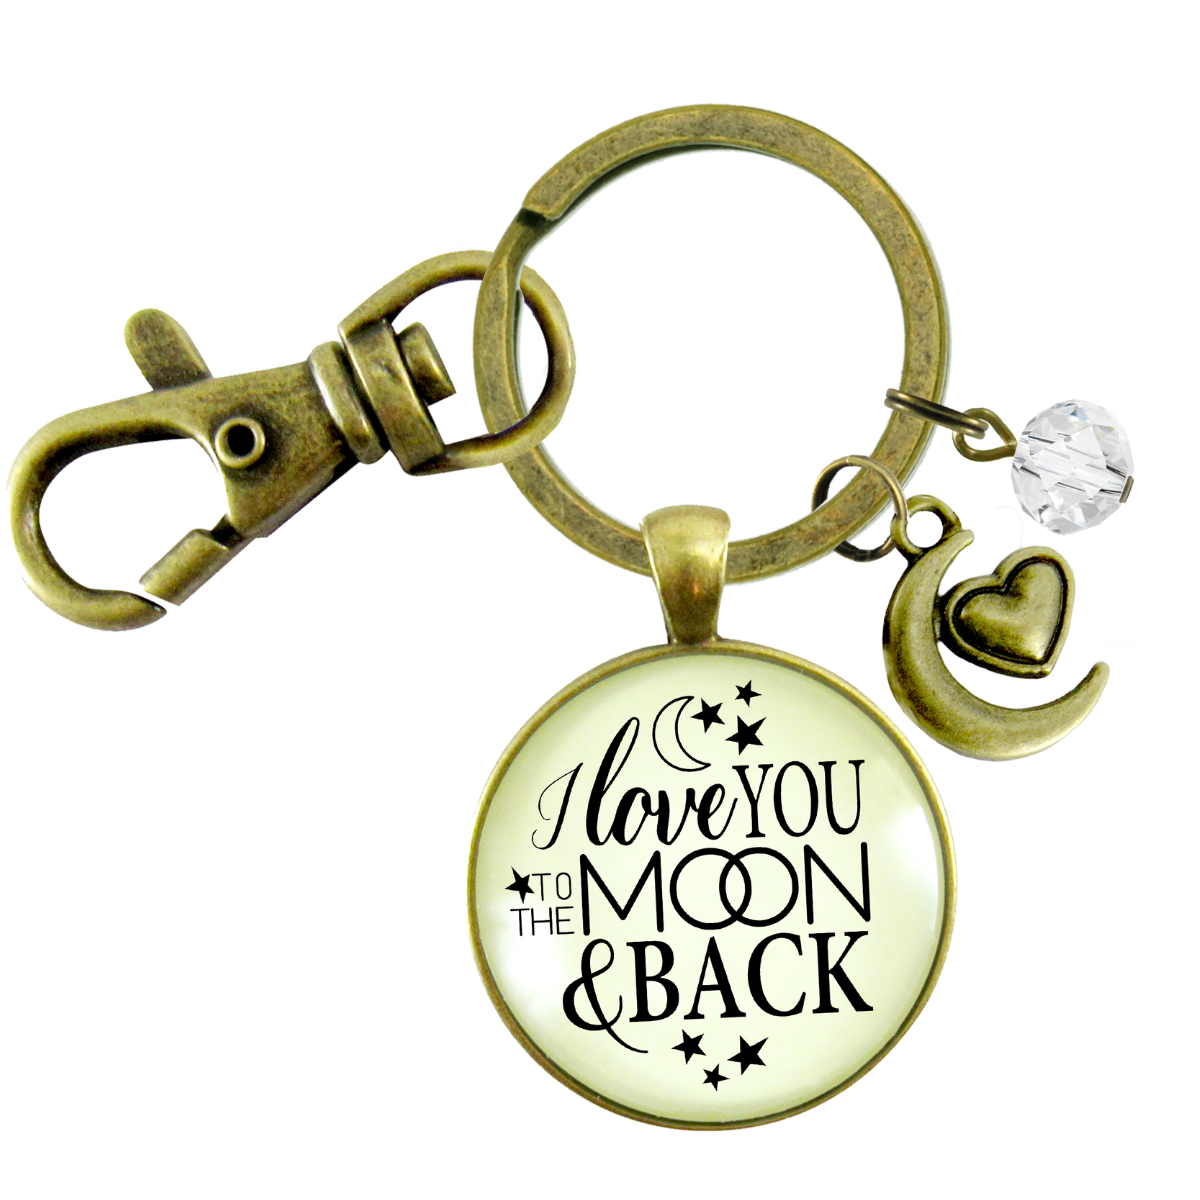 I Love You To The Moon and Back Keychain Inspirational Jewelry Half Moon Heart Charm - Gutsy Goodness Handmade Jewelry;I Love You To The Moon And Back Keychain Inspirational Jewelry Half Moon Heart Charm - Gutsy Goodness Handmade Jewelry Gifts